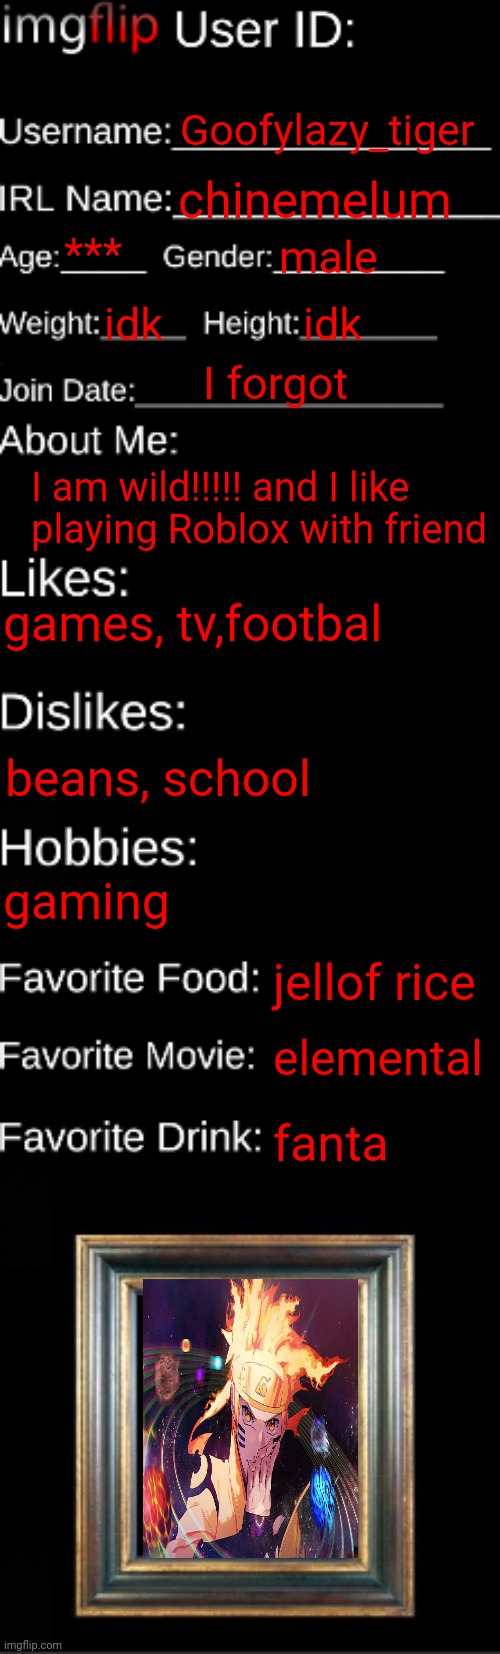 imgflip ID Card | Goofylazy_tiger; chinemelum; ***; male; idk; idk; I forgot; I am wild!!!!! and I like playing Roblox with friend; games, tv,footbal; beans, school; gaming; jellof rice; elemental; fanta | image tagged in imgflip id card | made w/ Imgflip meme maker